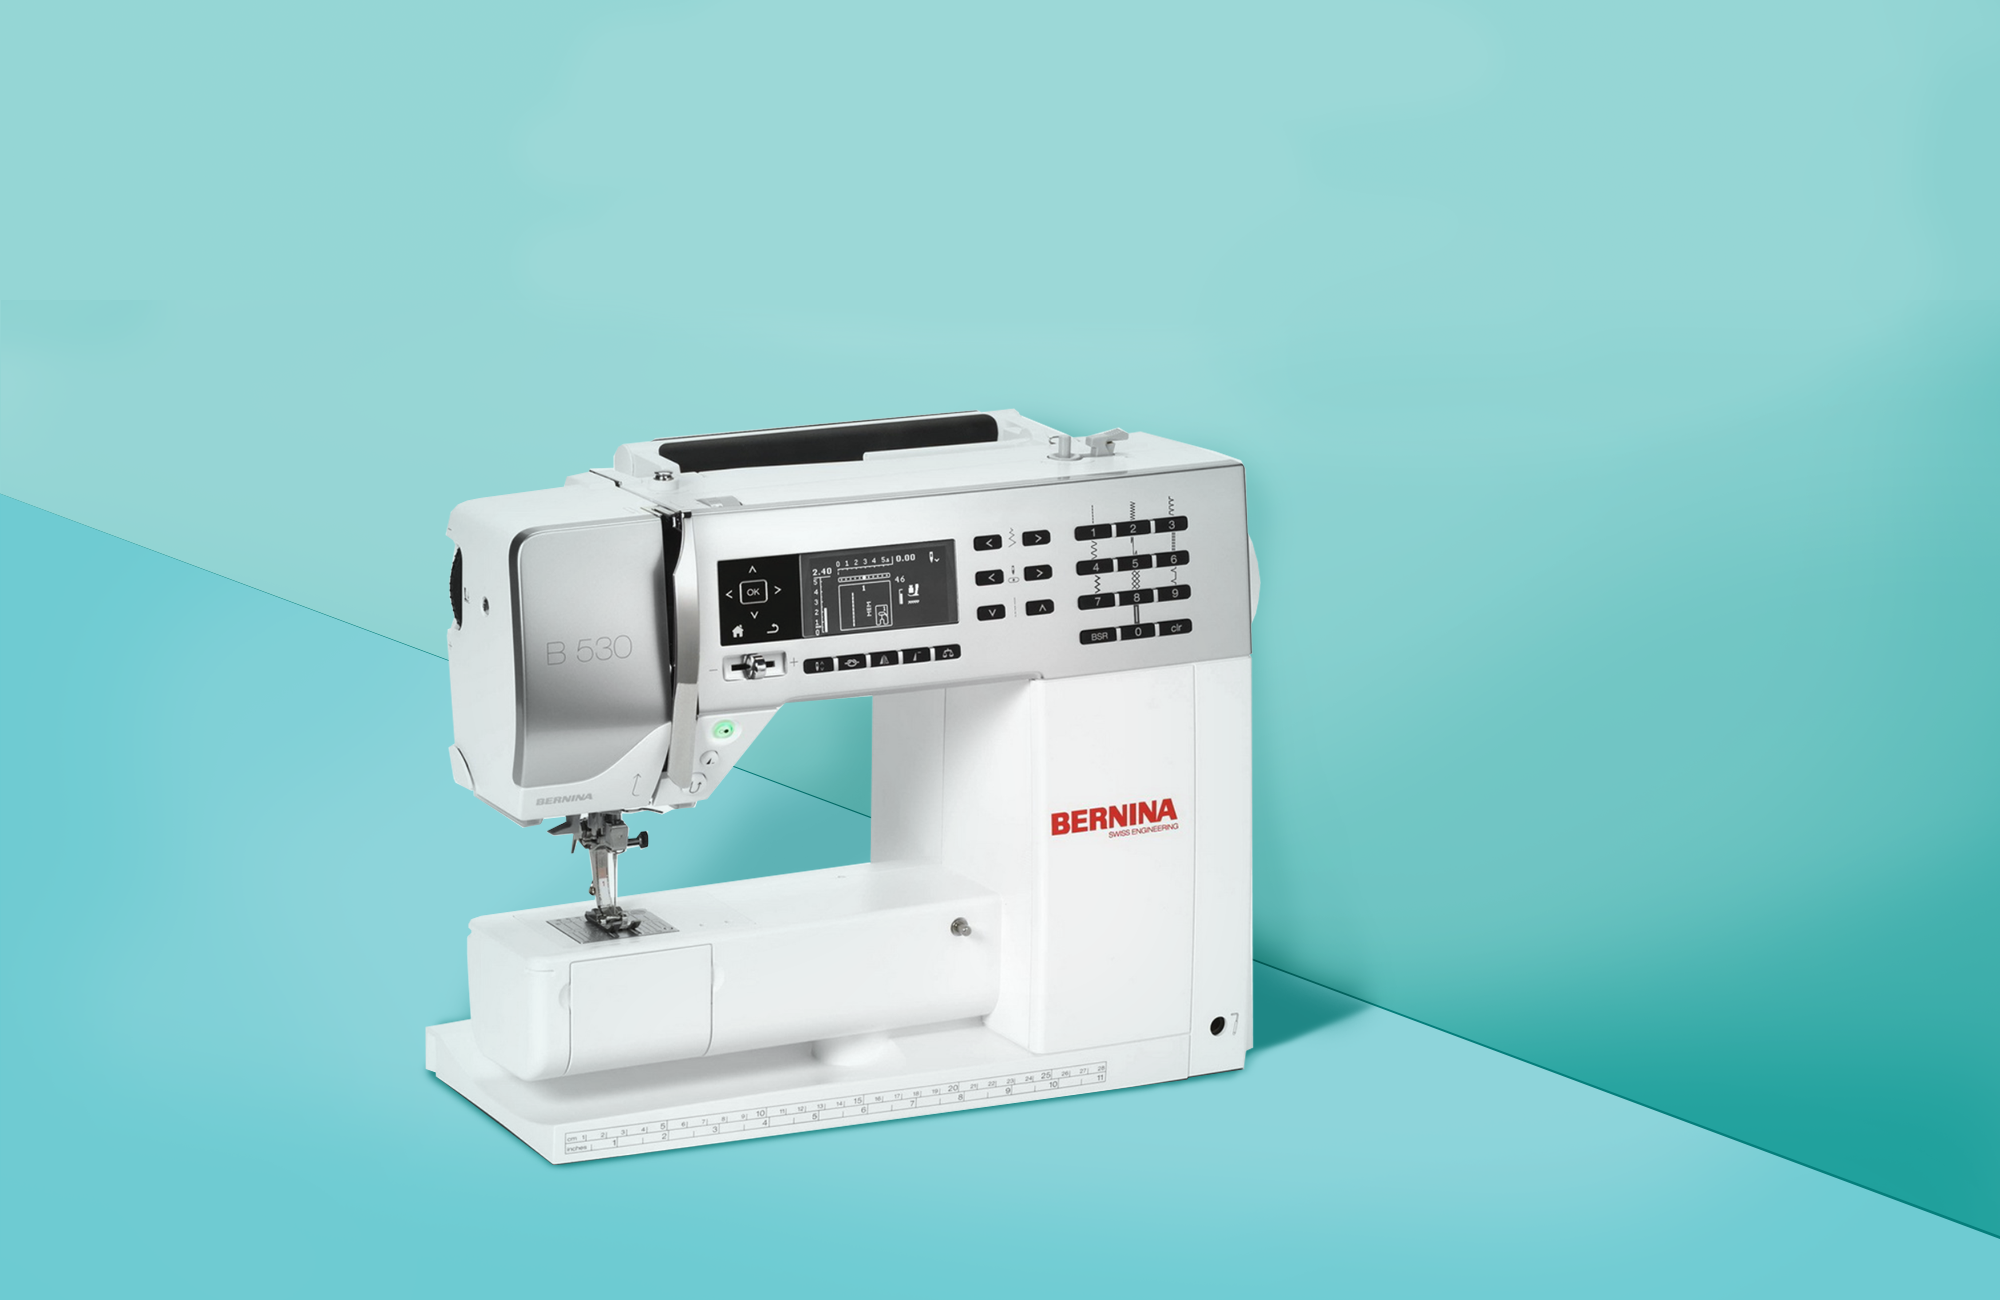 10 Best Sewing Machines to Buy 2021 - Top Sewing Machine Reviews